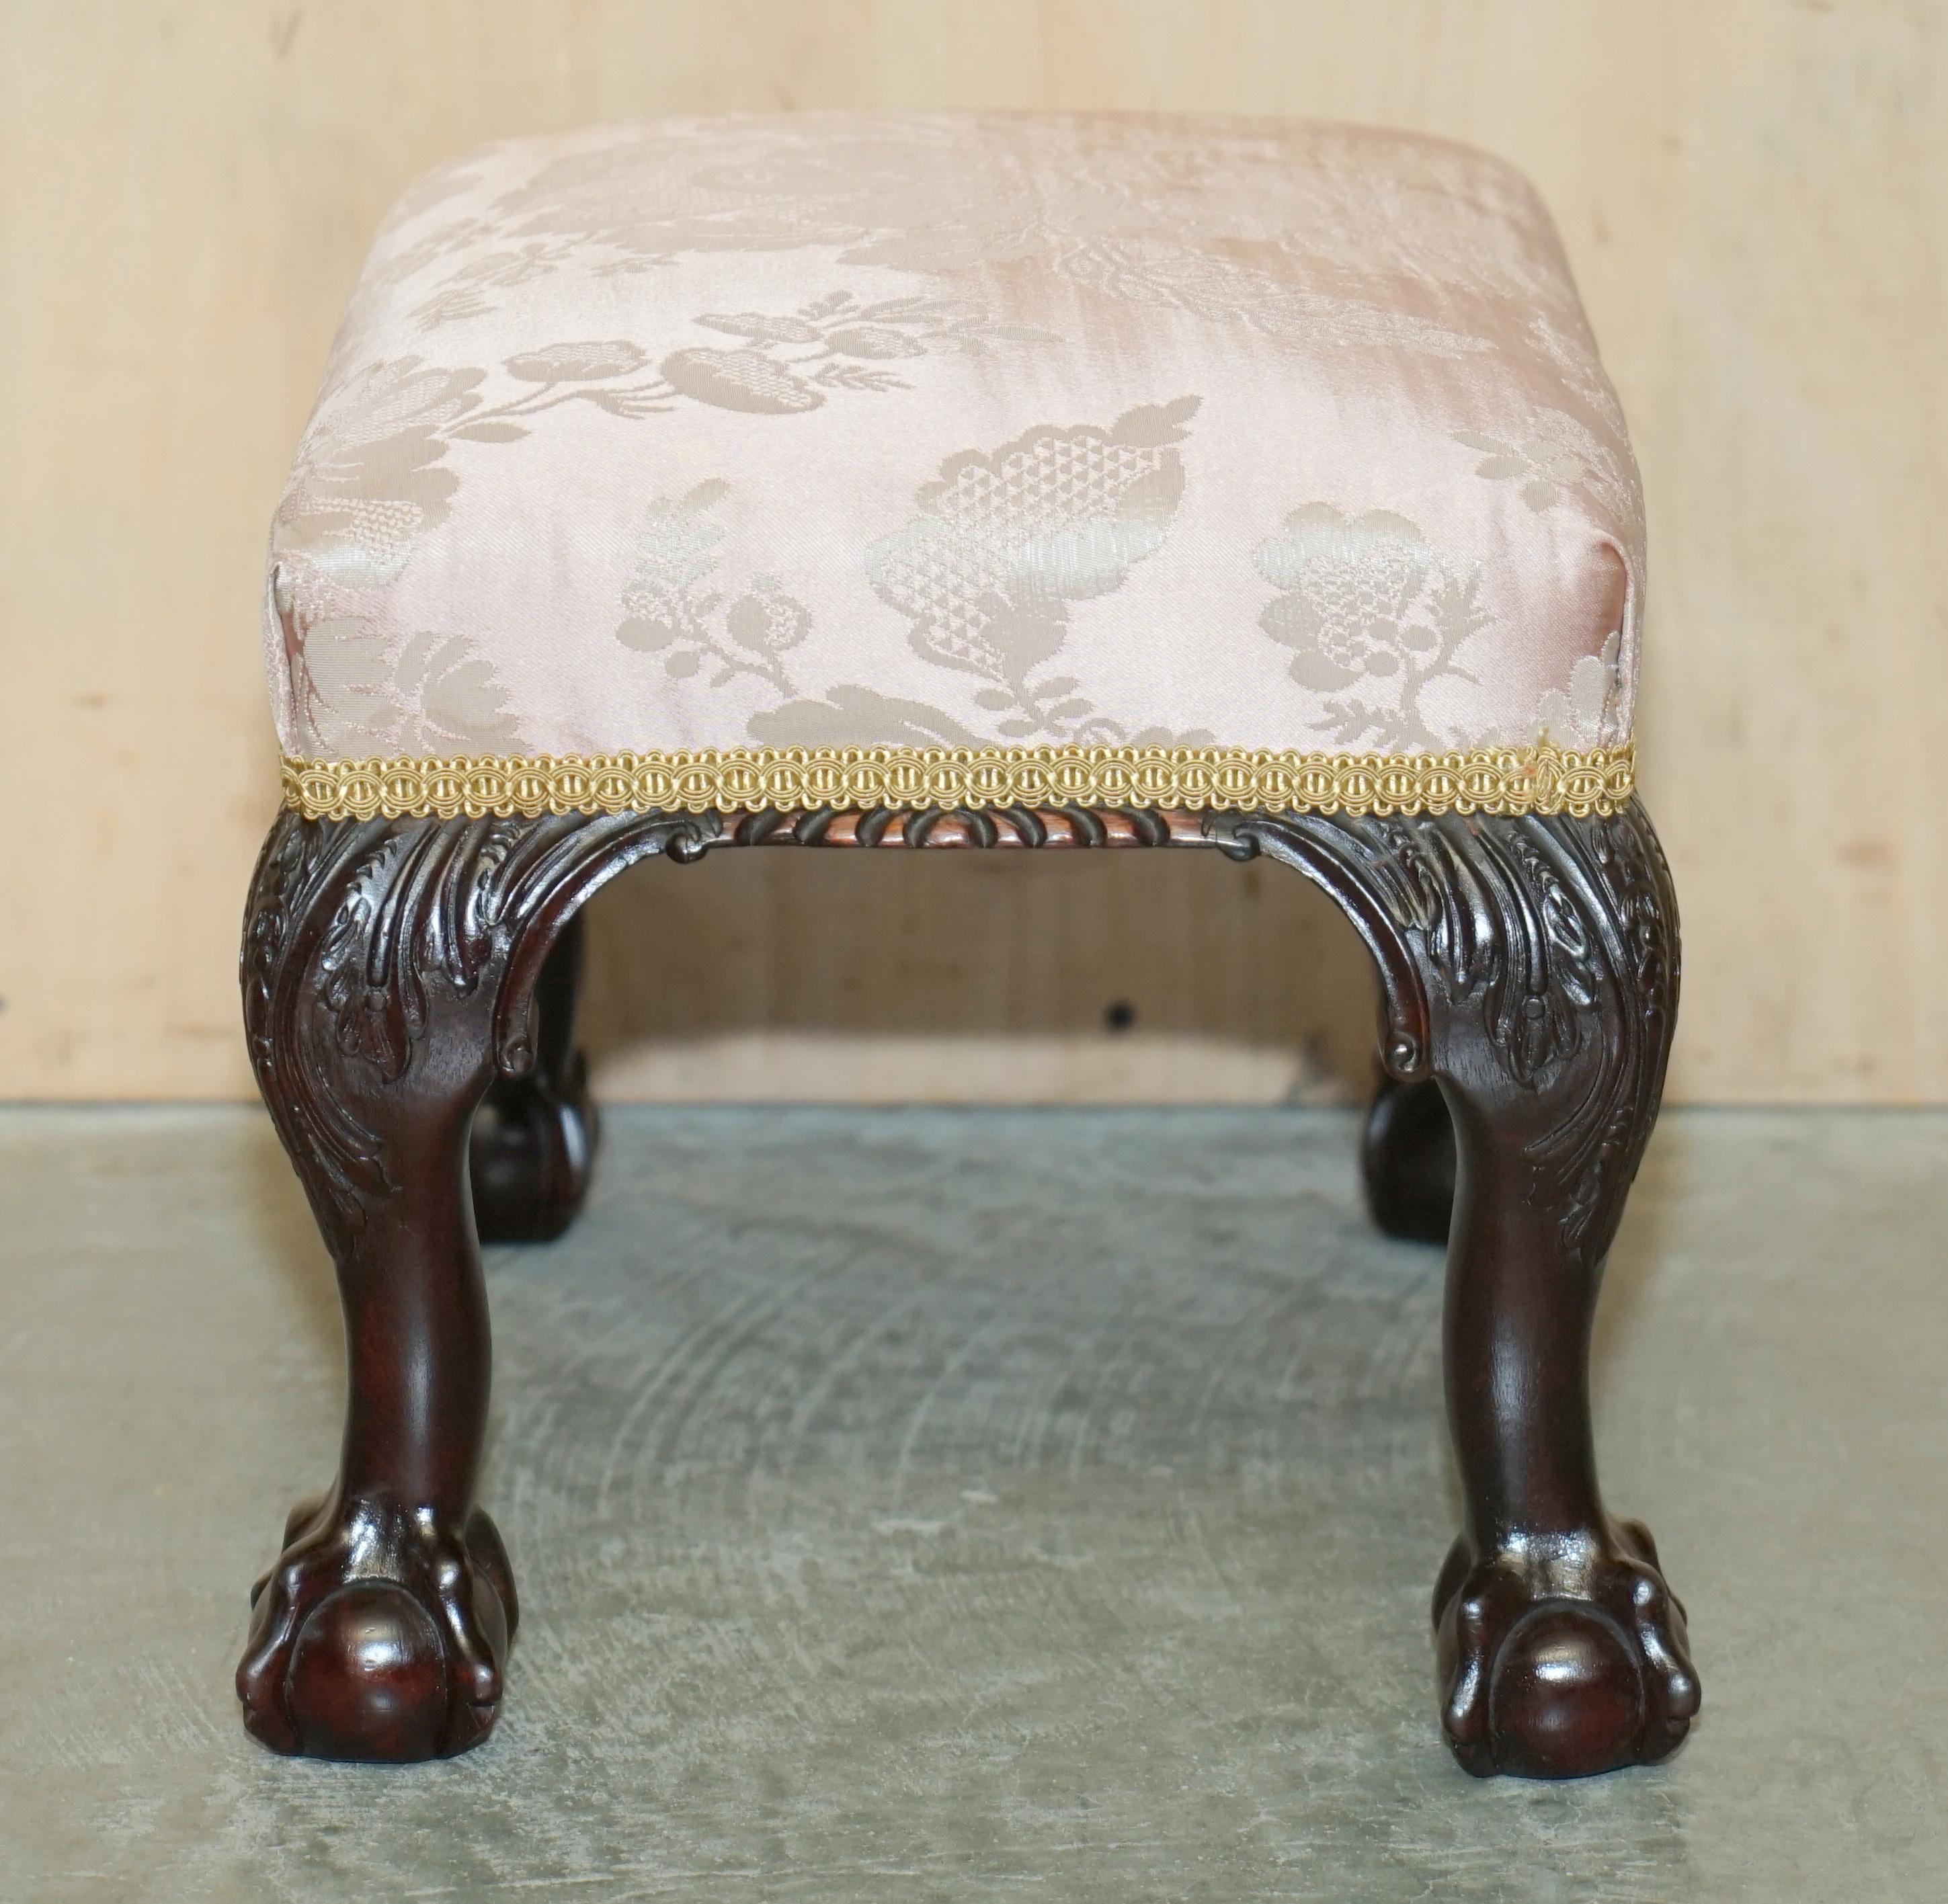 SUBLIME PAiR VON ANTIQUE VICTORIAN CLAW & BALL HARDWOOD FRAMED SMALL FOOTSTOOLS im Angebot 12